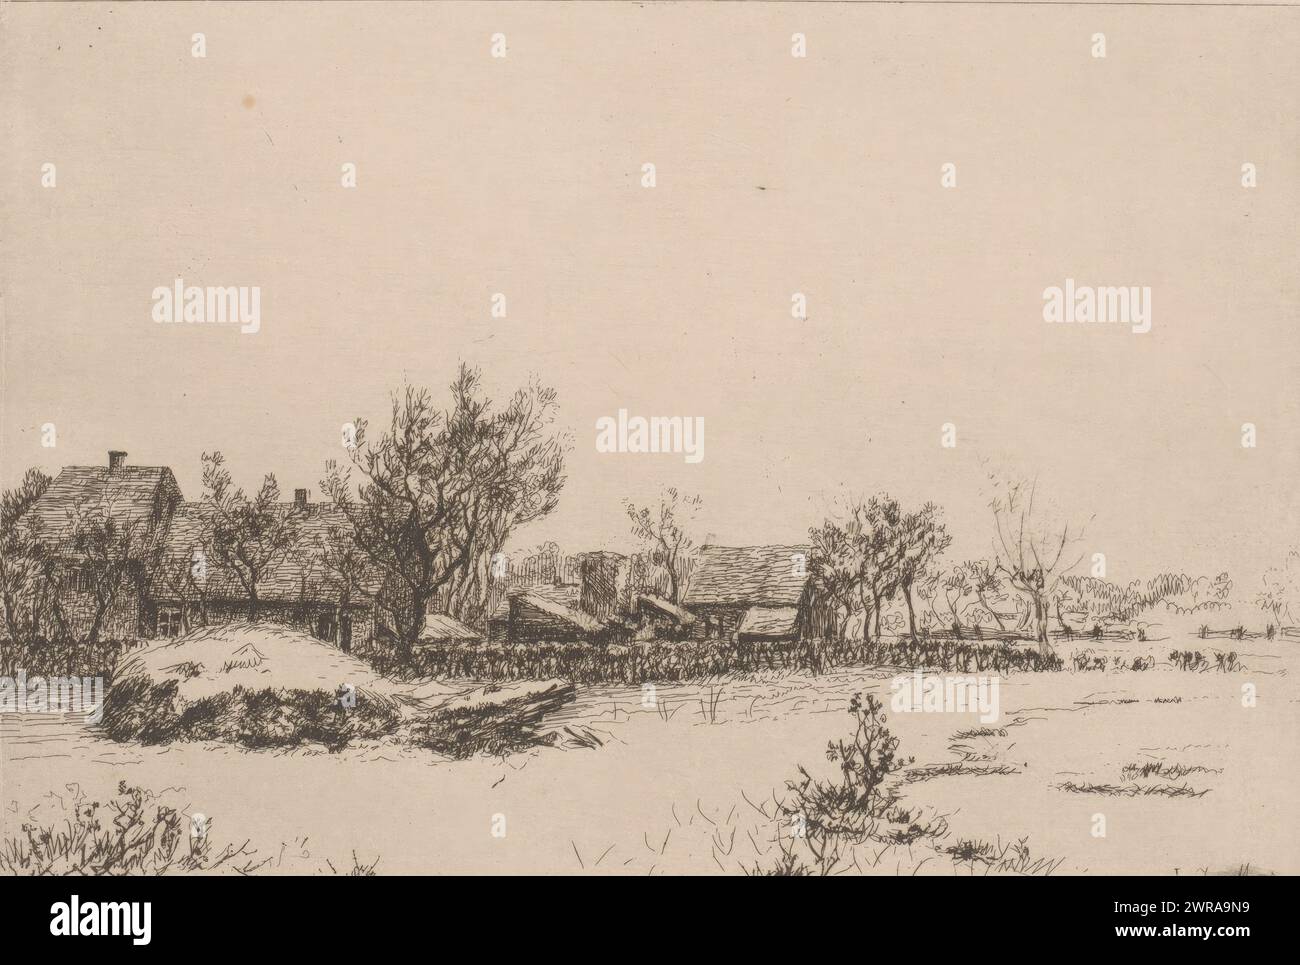 Winter landscape with village, print maker: Jerôme Tuyttens, c. 1850 - 1883, paper, etching, drypoint, height 149 mm × width 197 mm, print Stock Photo